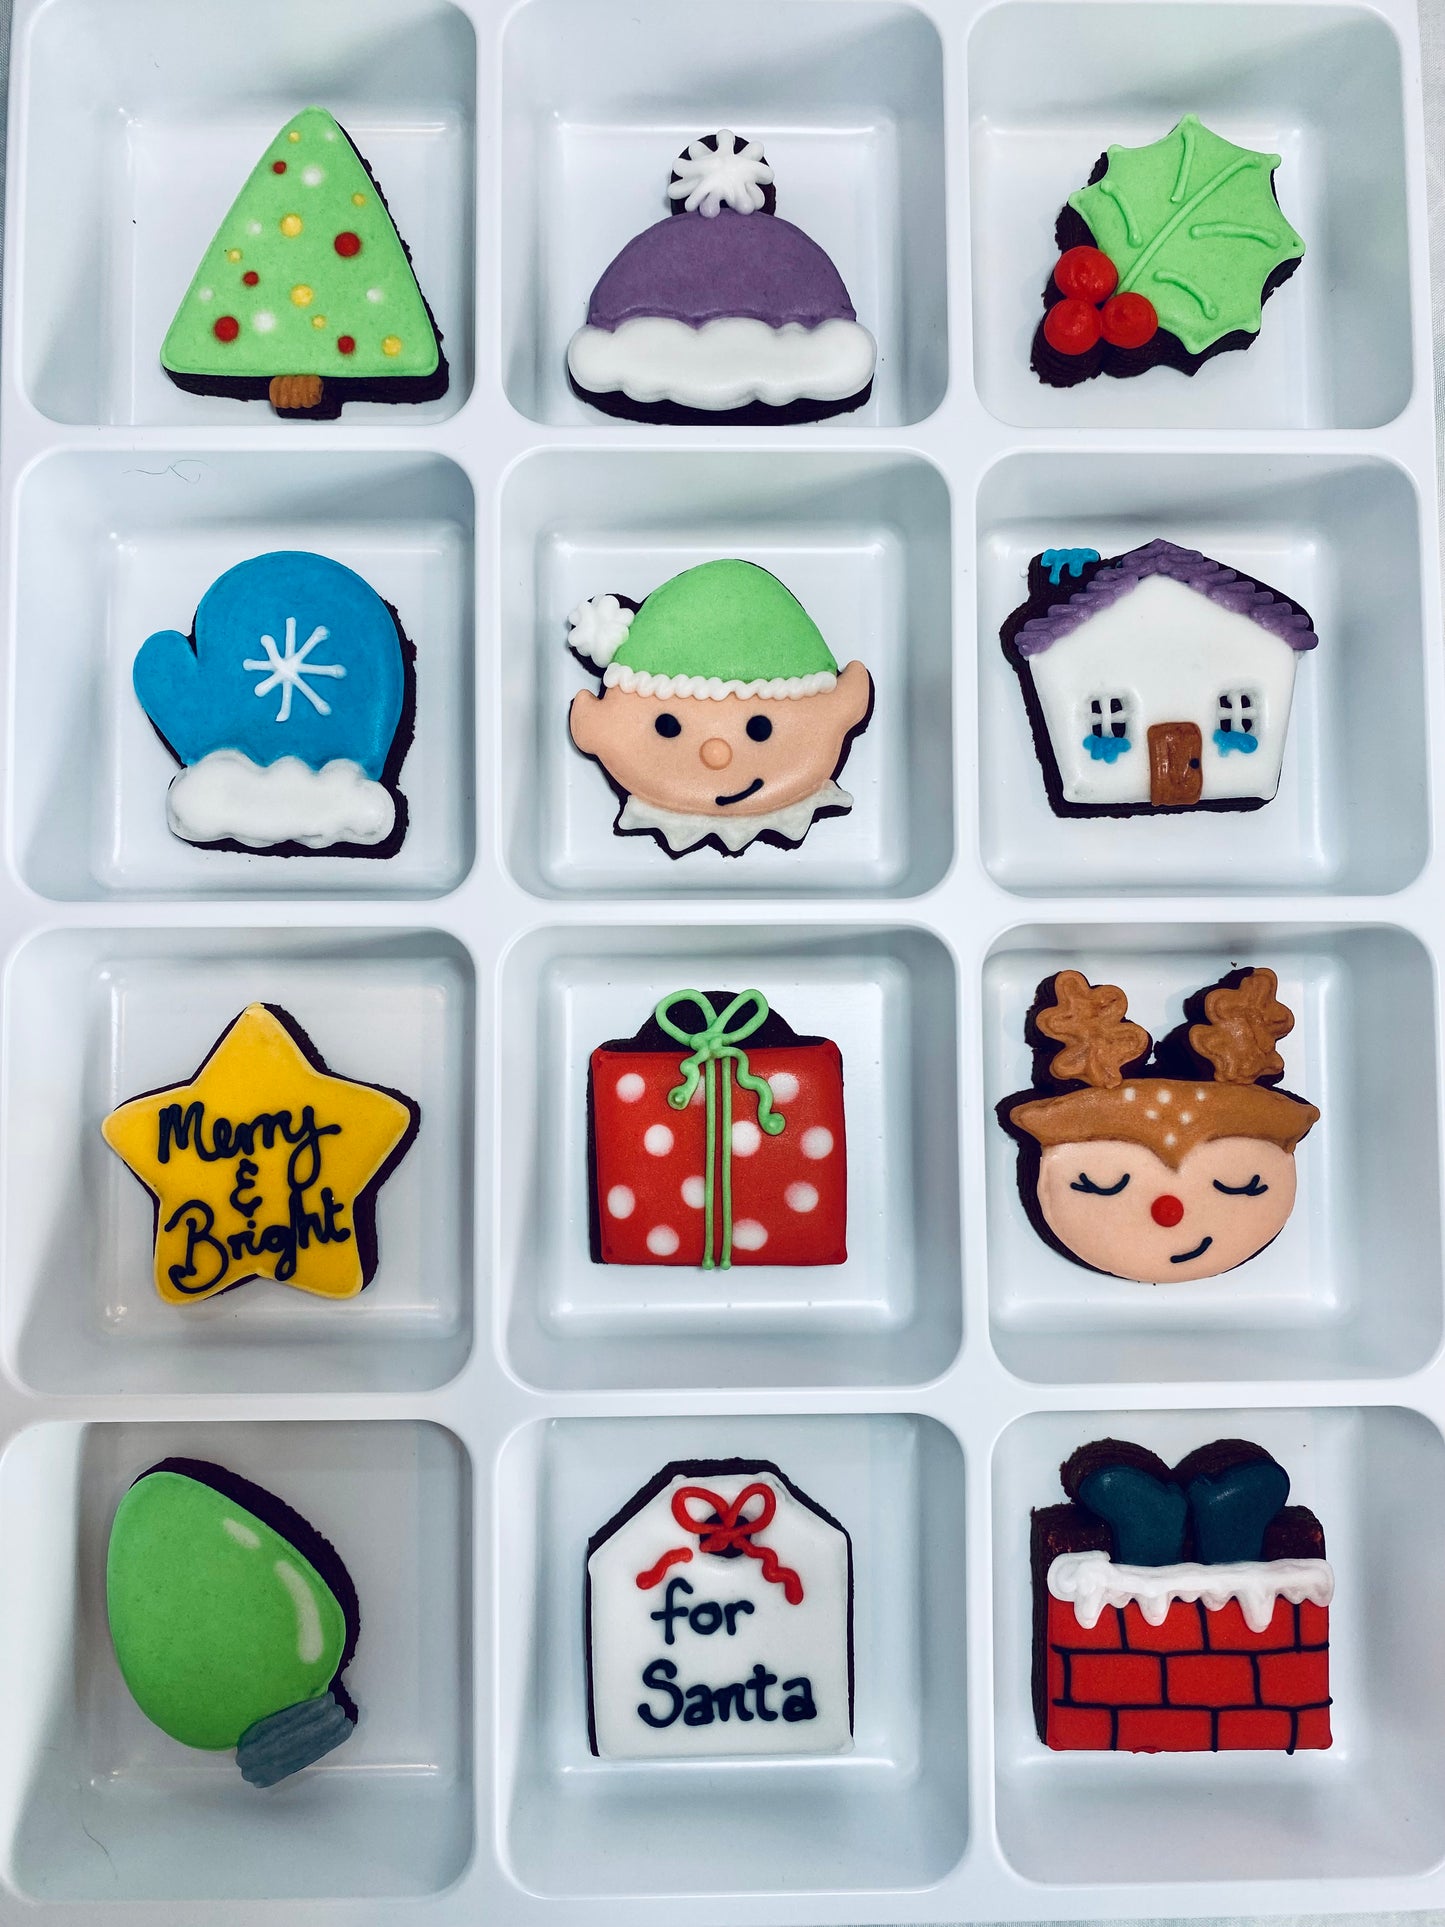 the second side of the advent calendar to show the iced biscuits included in the countdown to Christmas calendar